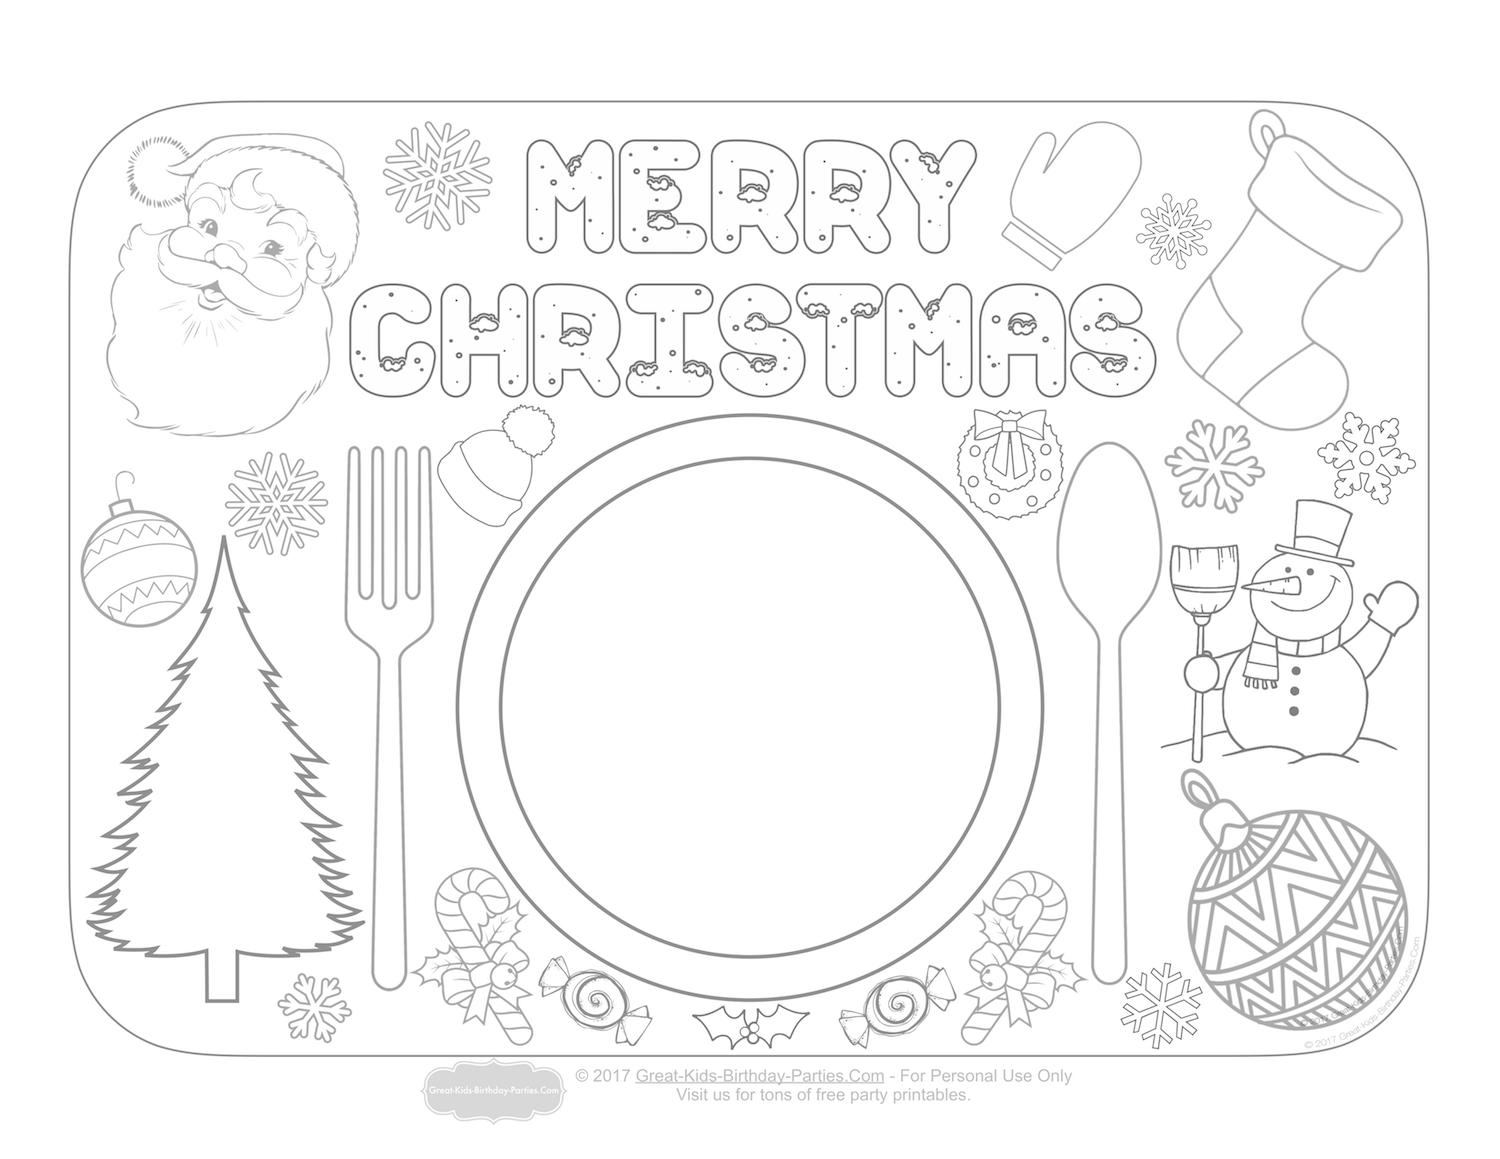 Christmas Placemats Christmas Decorations Xmas Christmas Colouring Christmas Party Christmas Eve Box Filler Christmas Printable Place Cards Paper Party Supplies Leadcampus Org